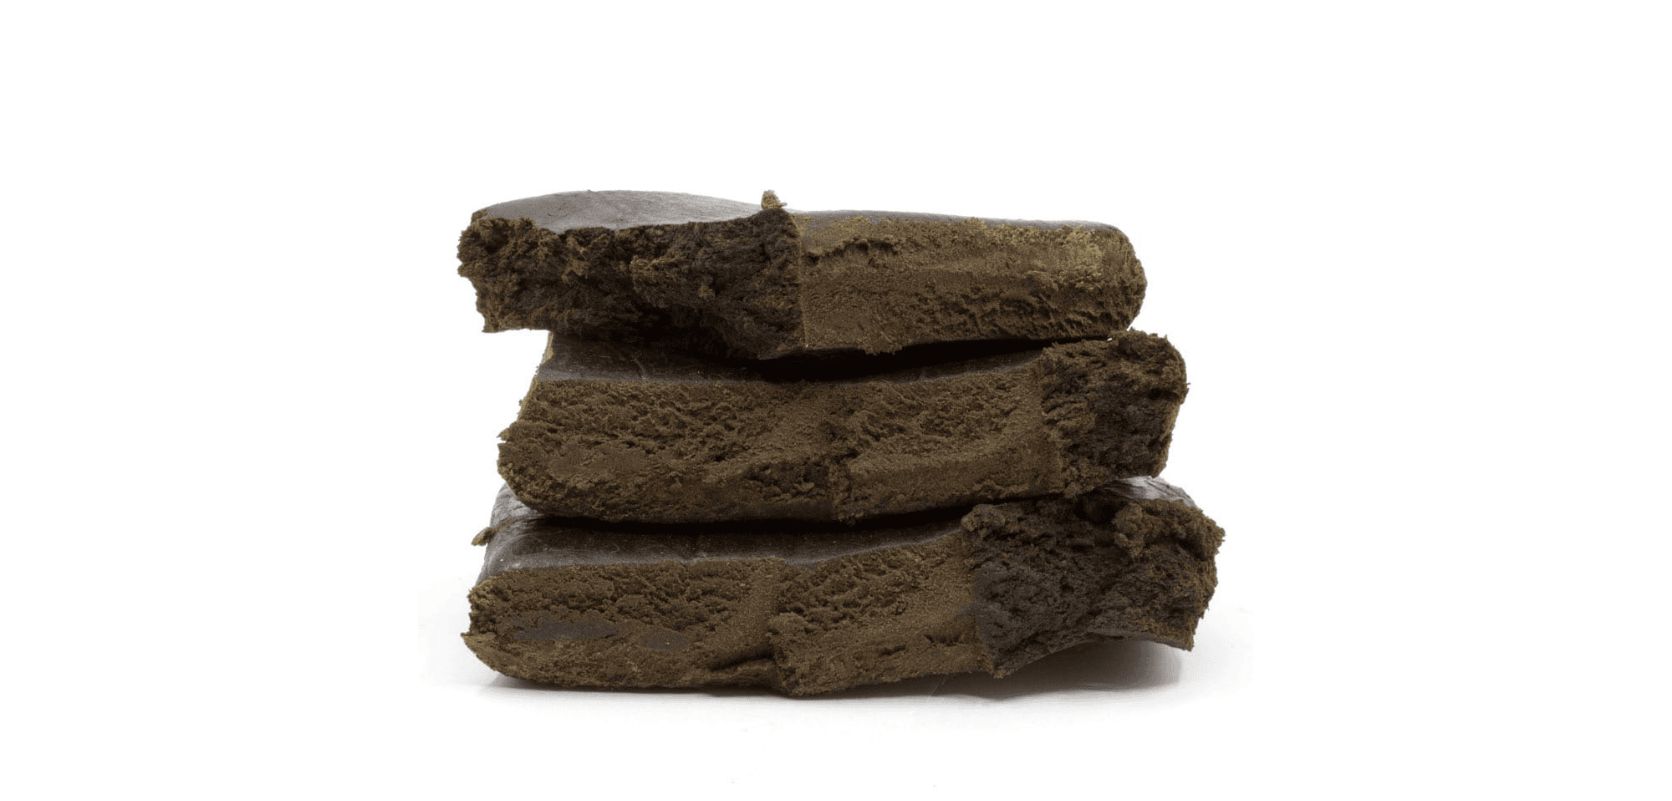 The best hashish for sale will be full of flavours, aromas, and the effects will be legendary. 